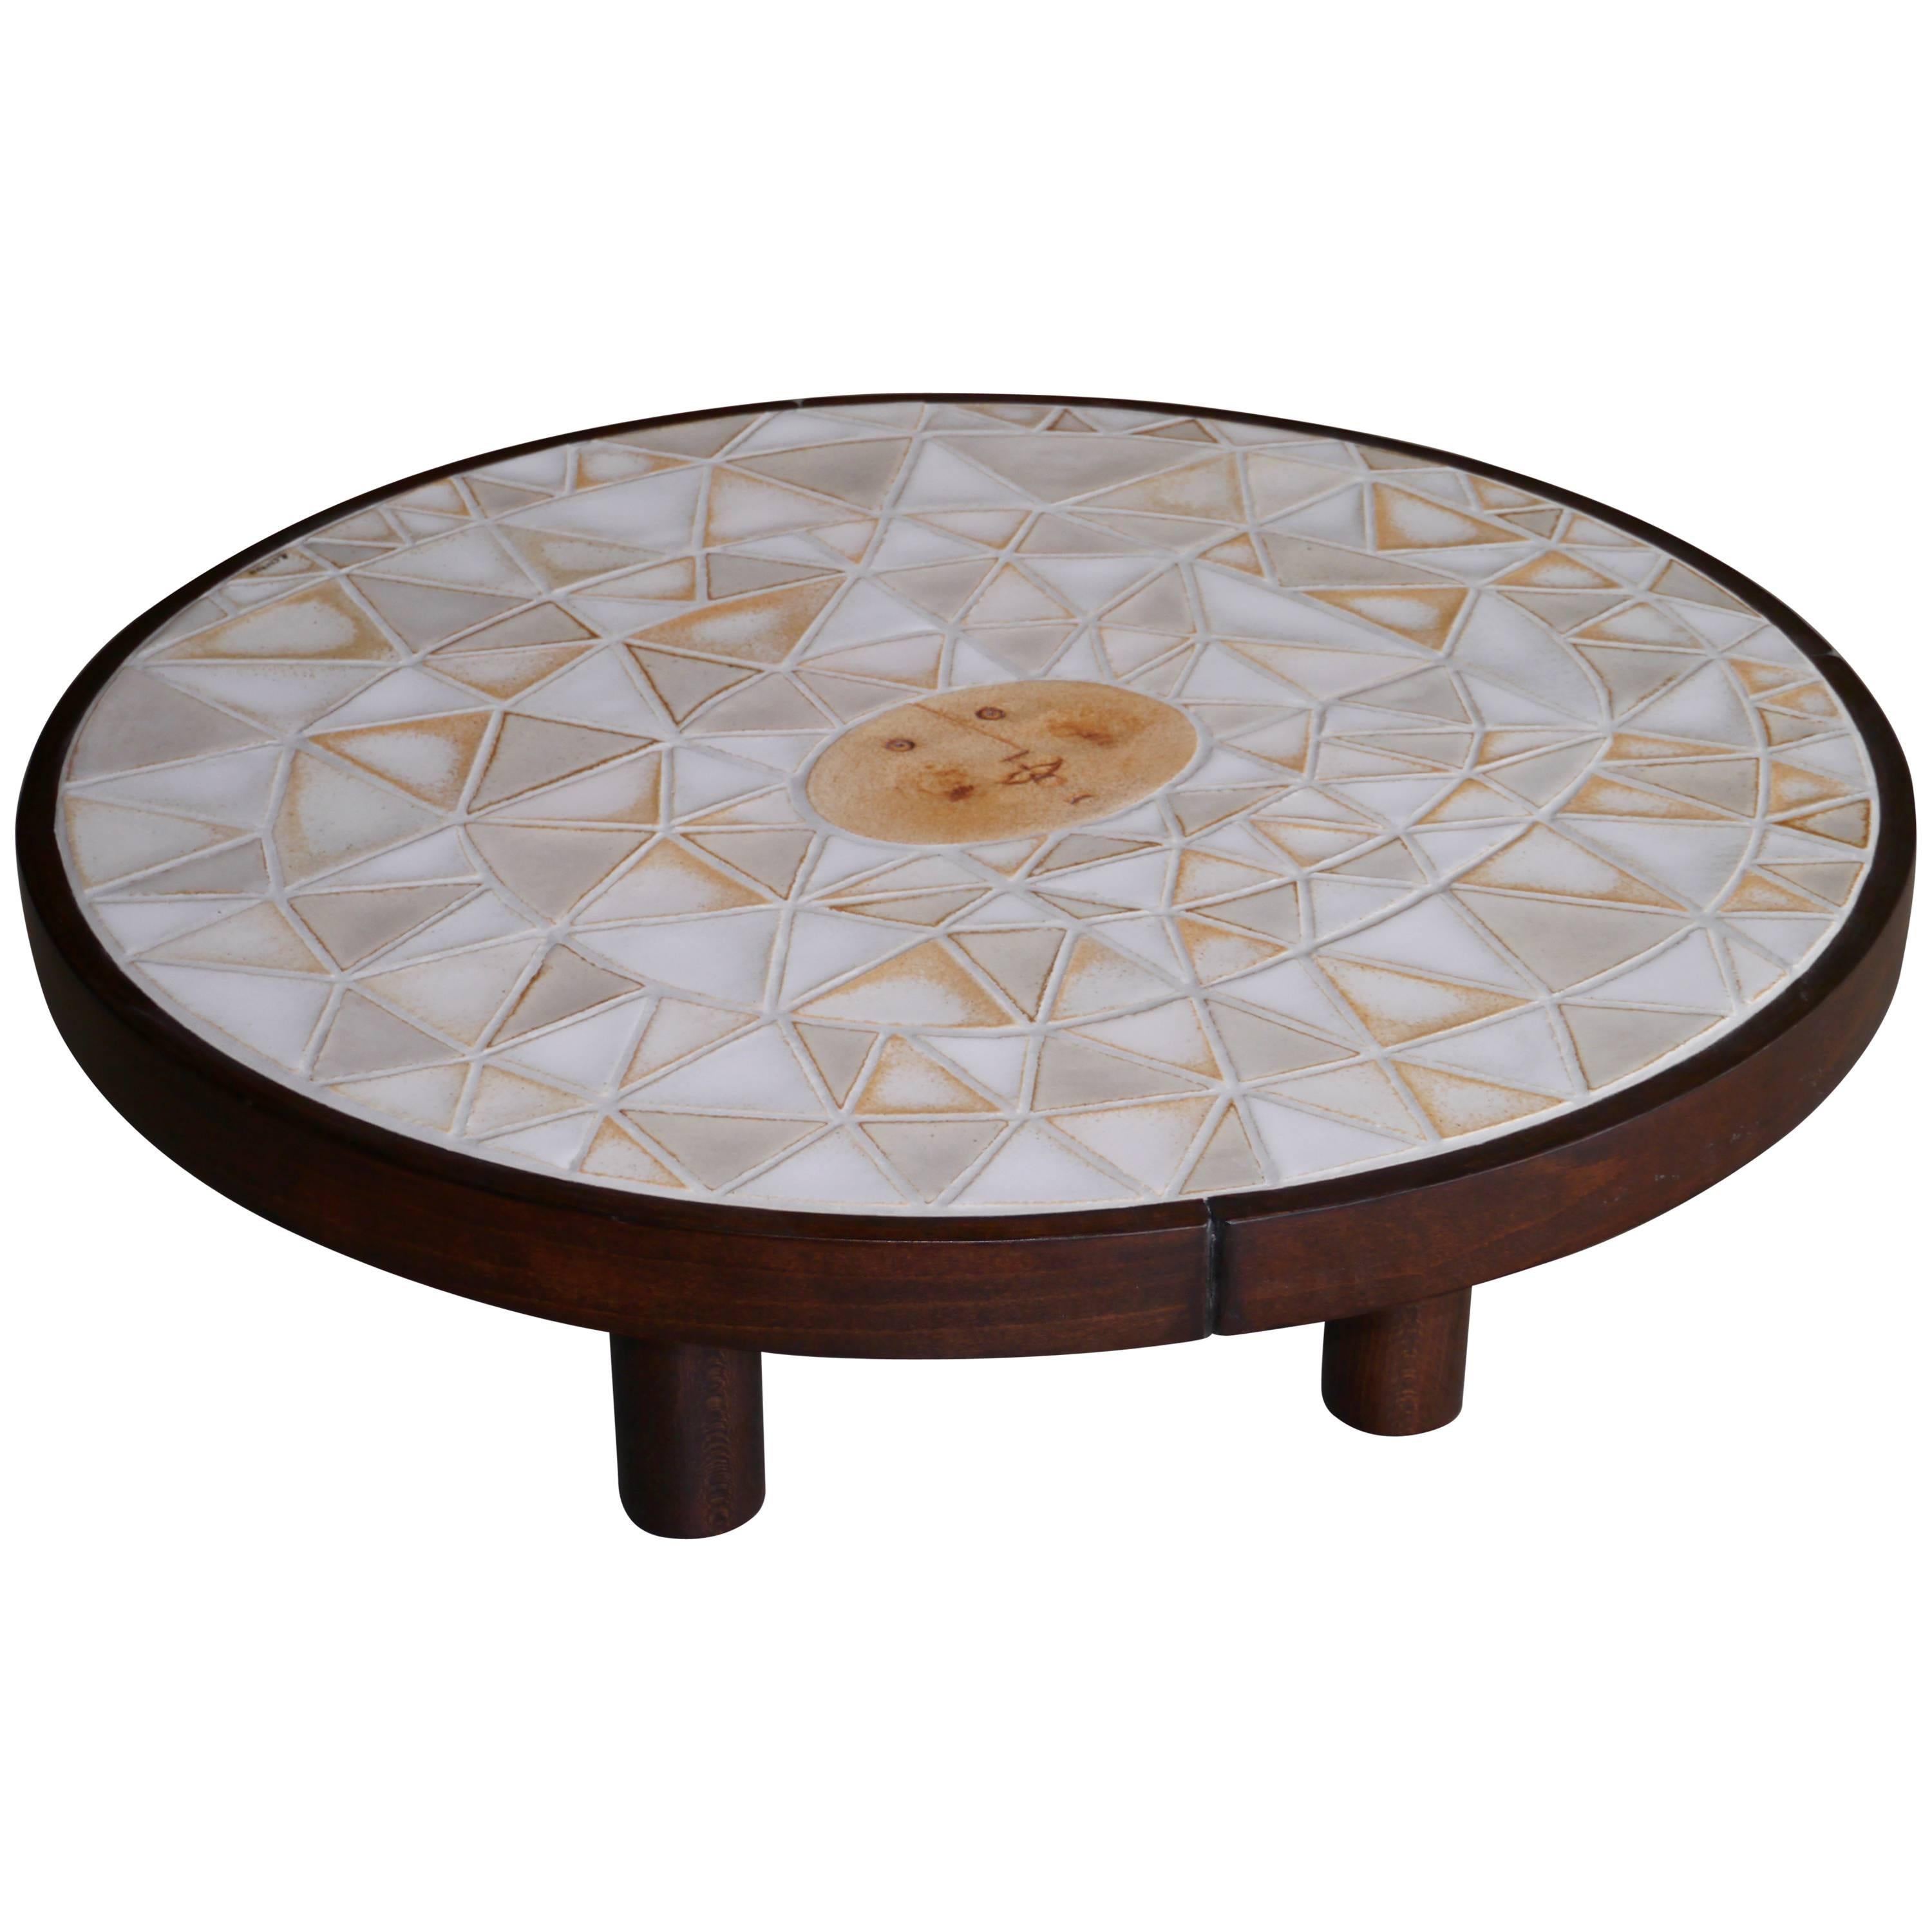 Roger Capron - Exceptional Round Low Table - Vallauris France c. 1980 For Sale